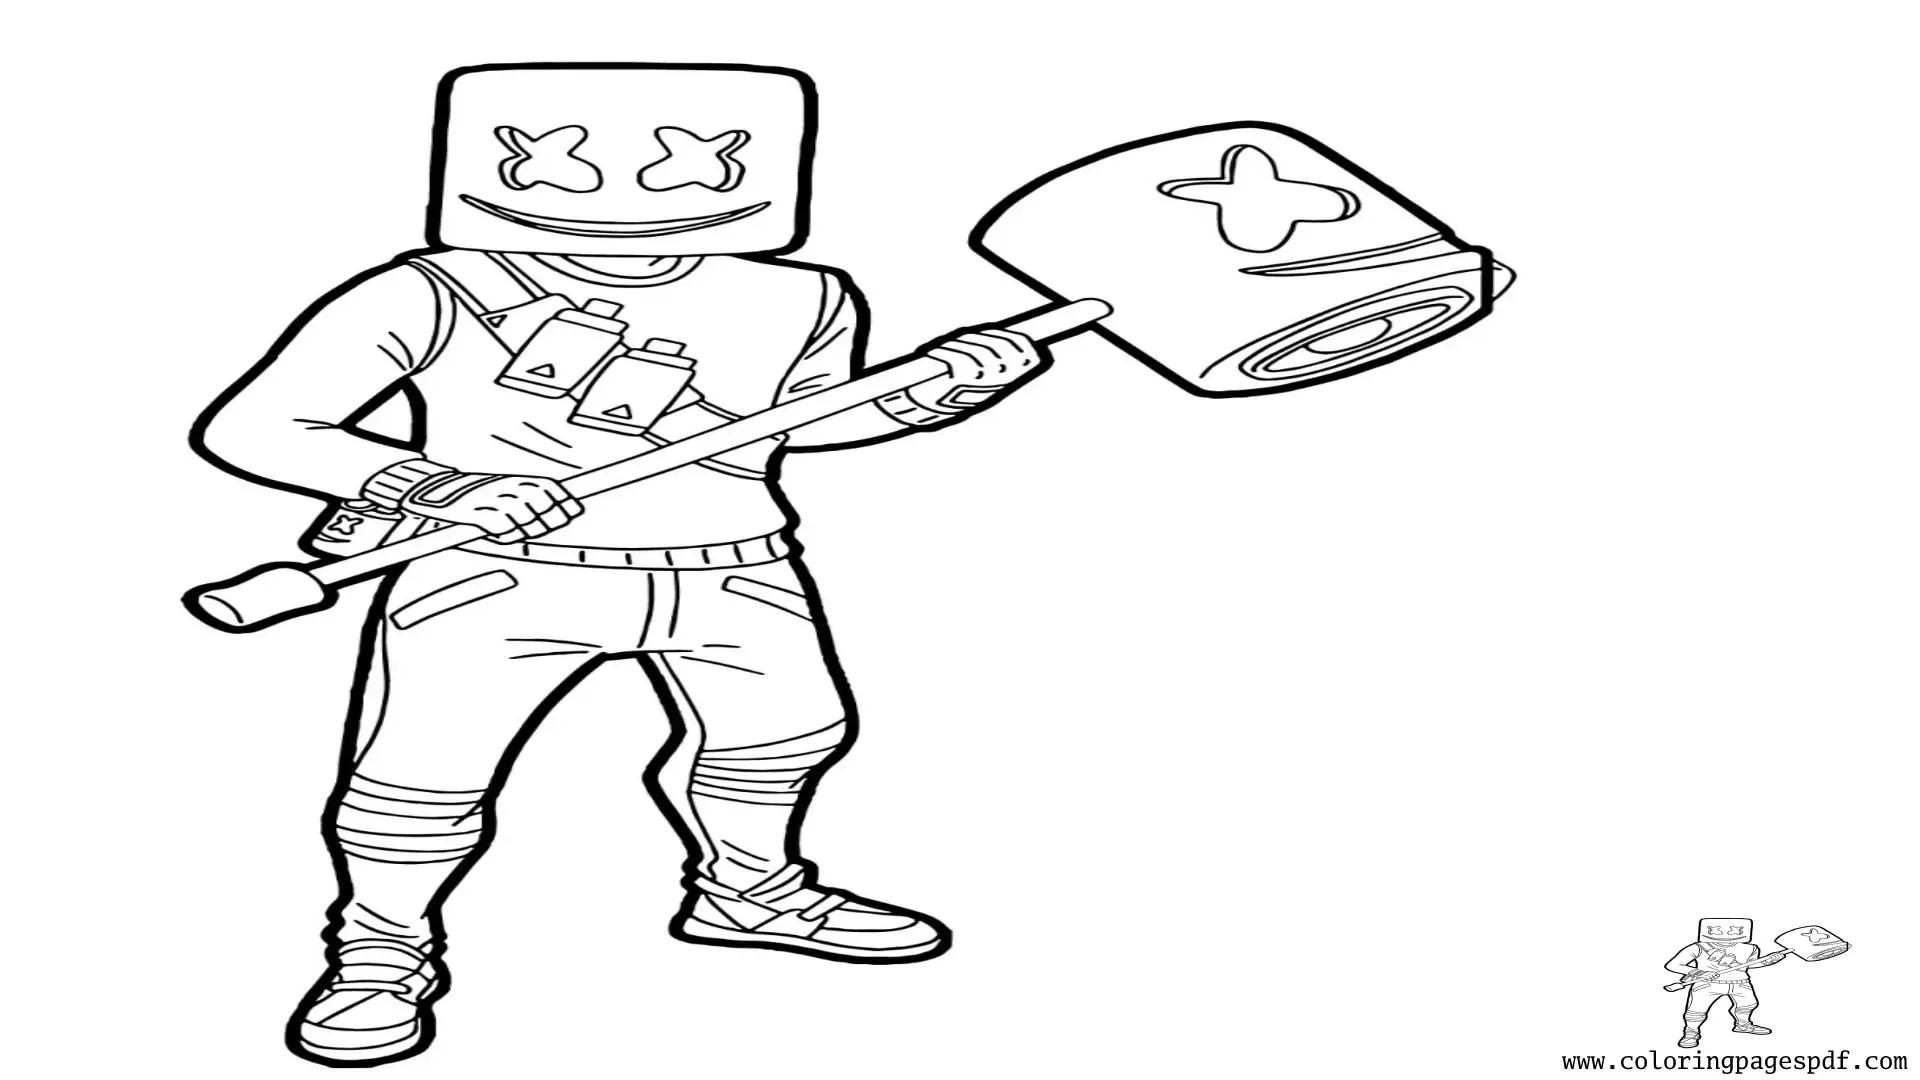 Coloring Page Of Fortnite Marshmello Skin